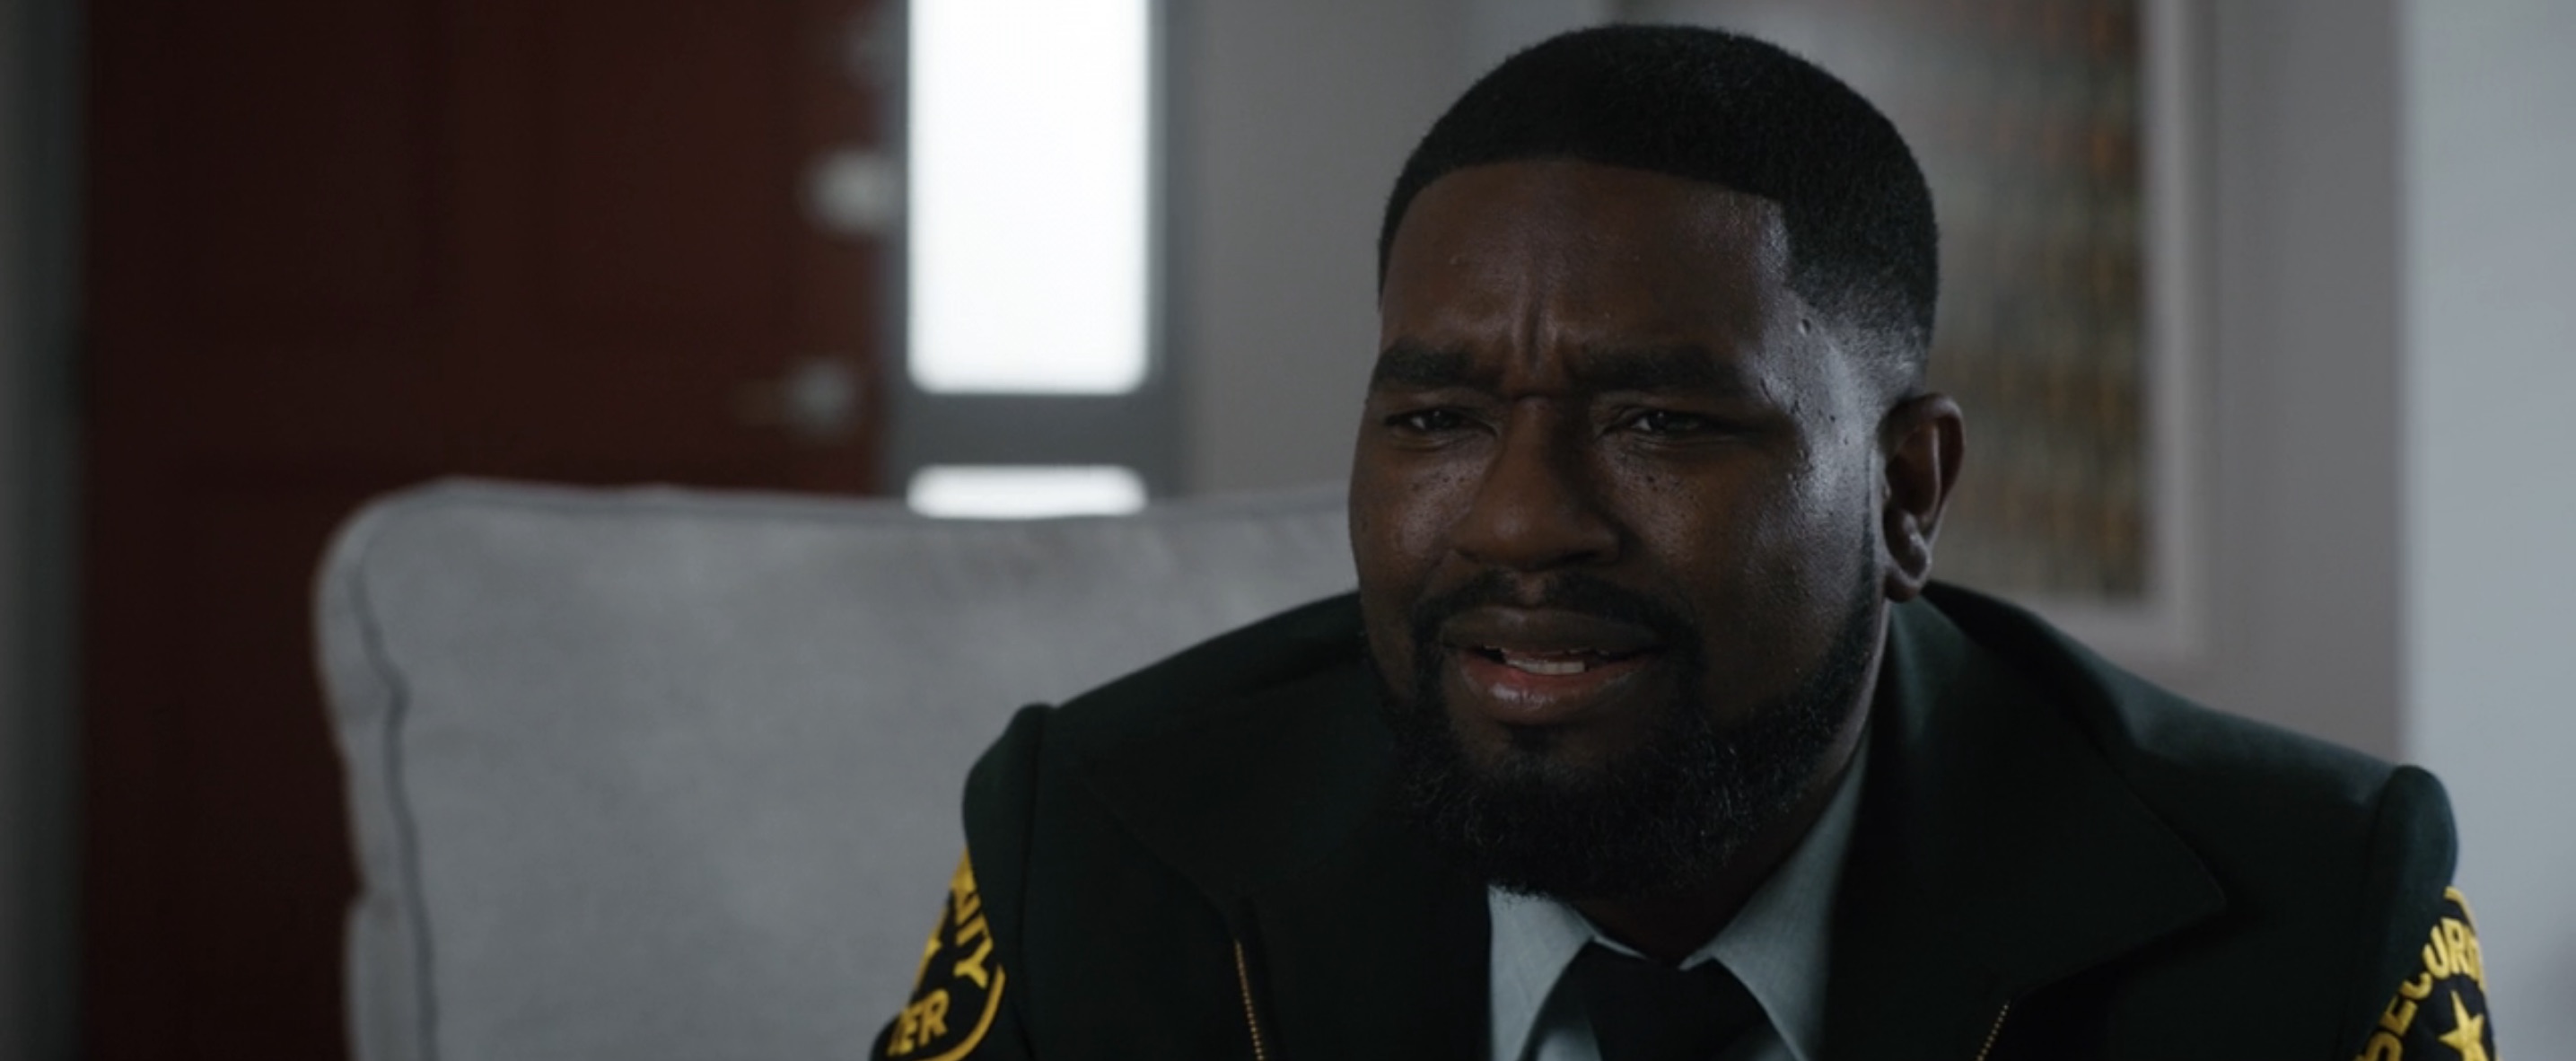 Free Guy Cast - Lil Rel Howery as Buddy